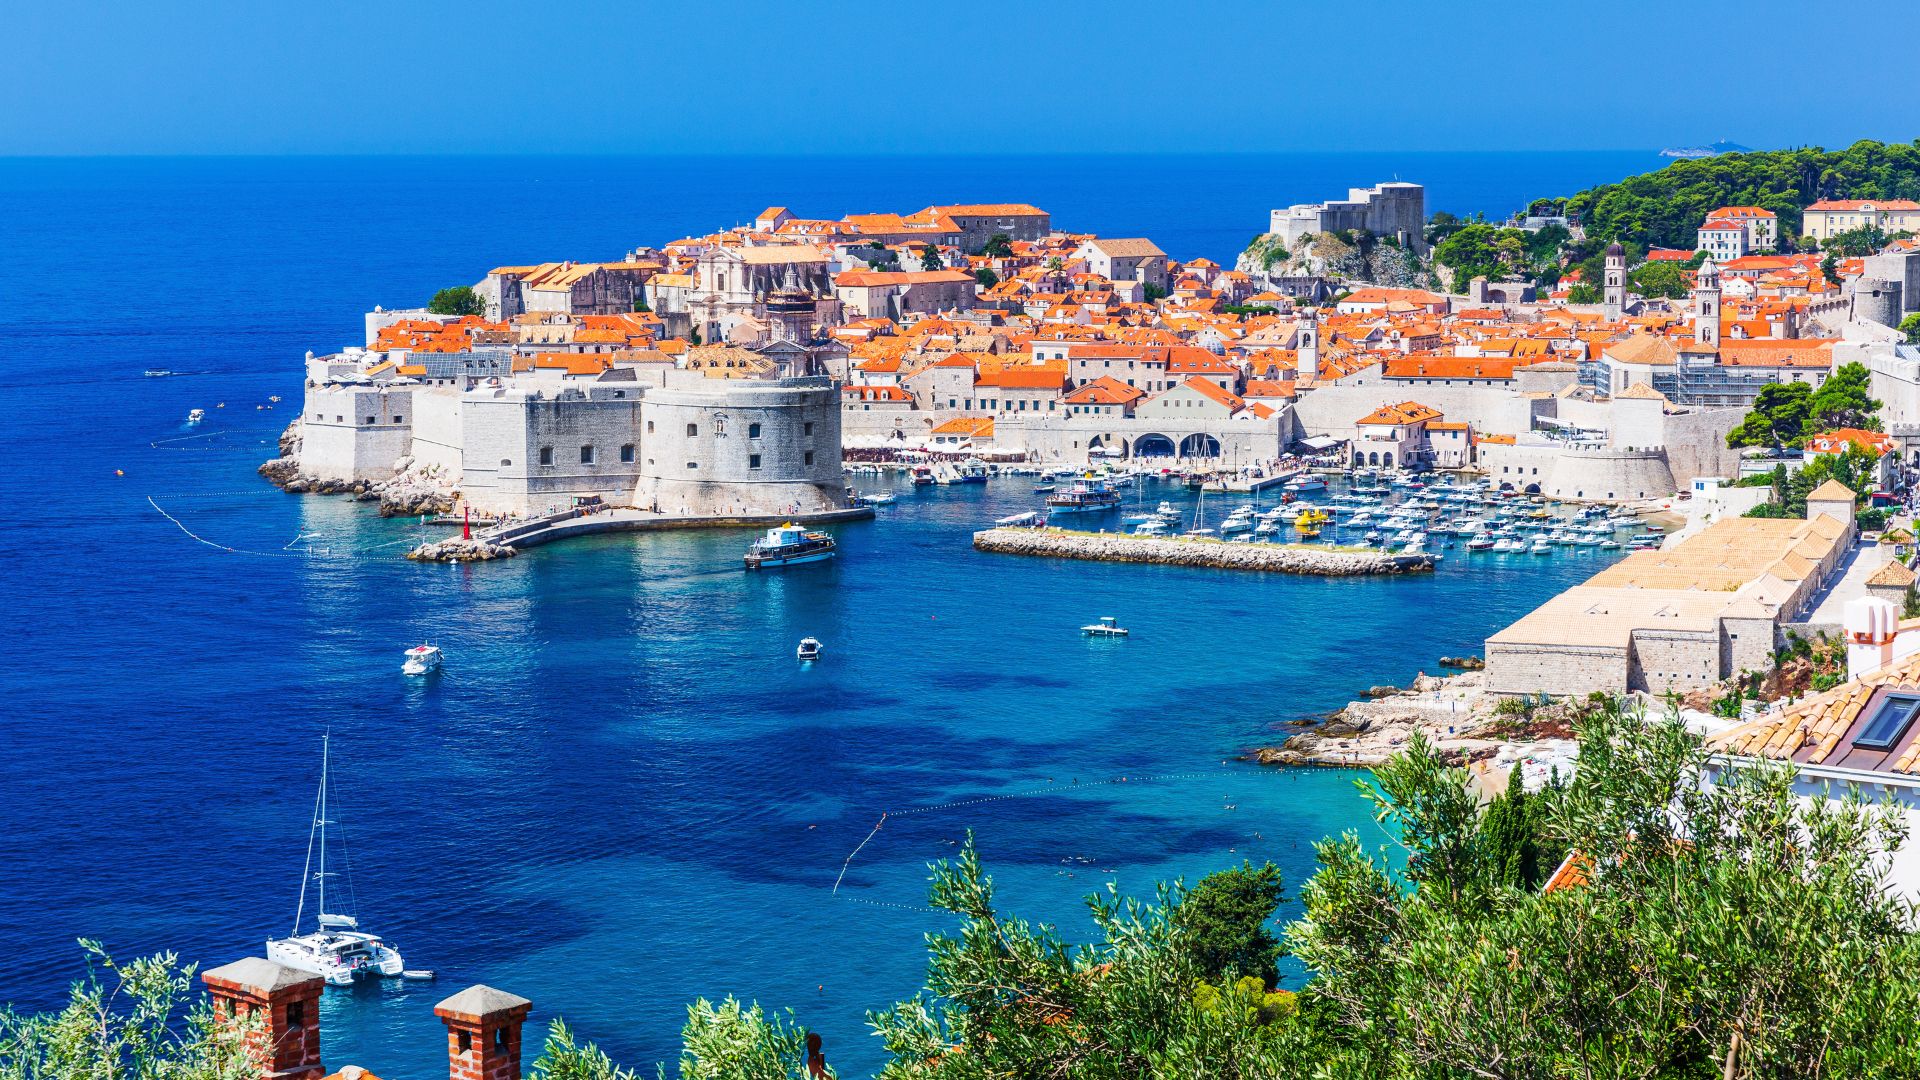 The Independent published: These are the best places in Croatia, you must visit them | Serbia Visit